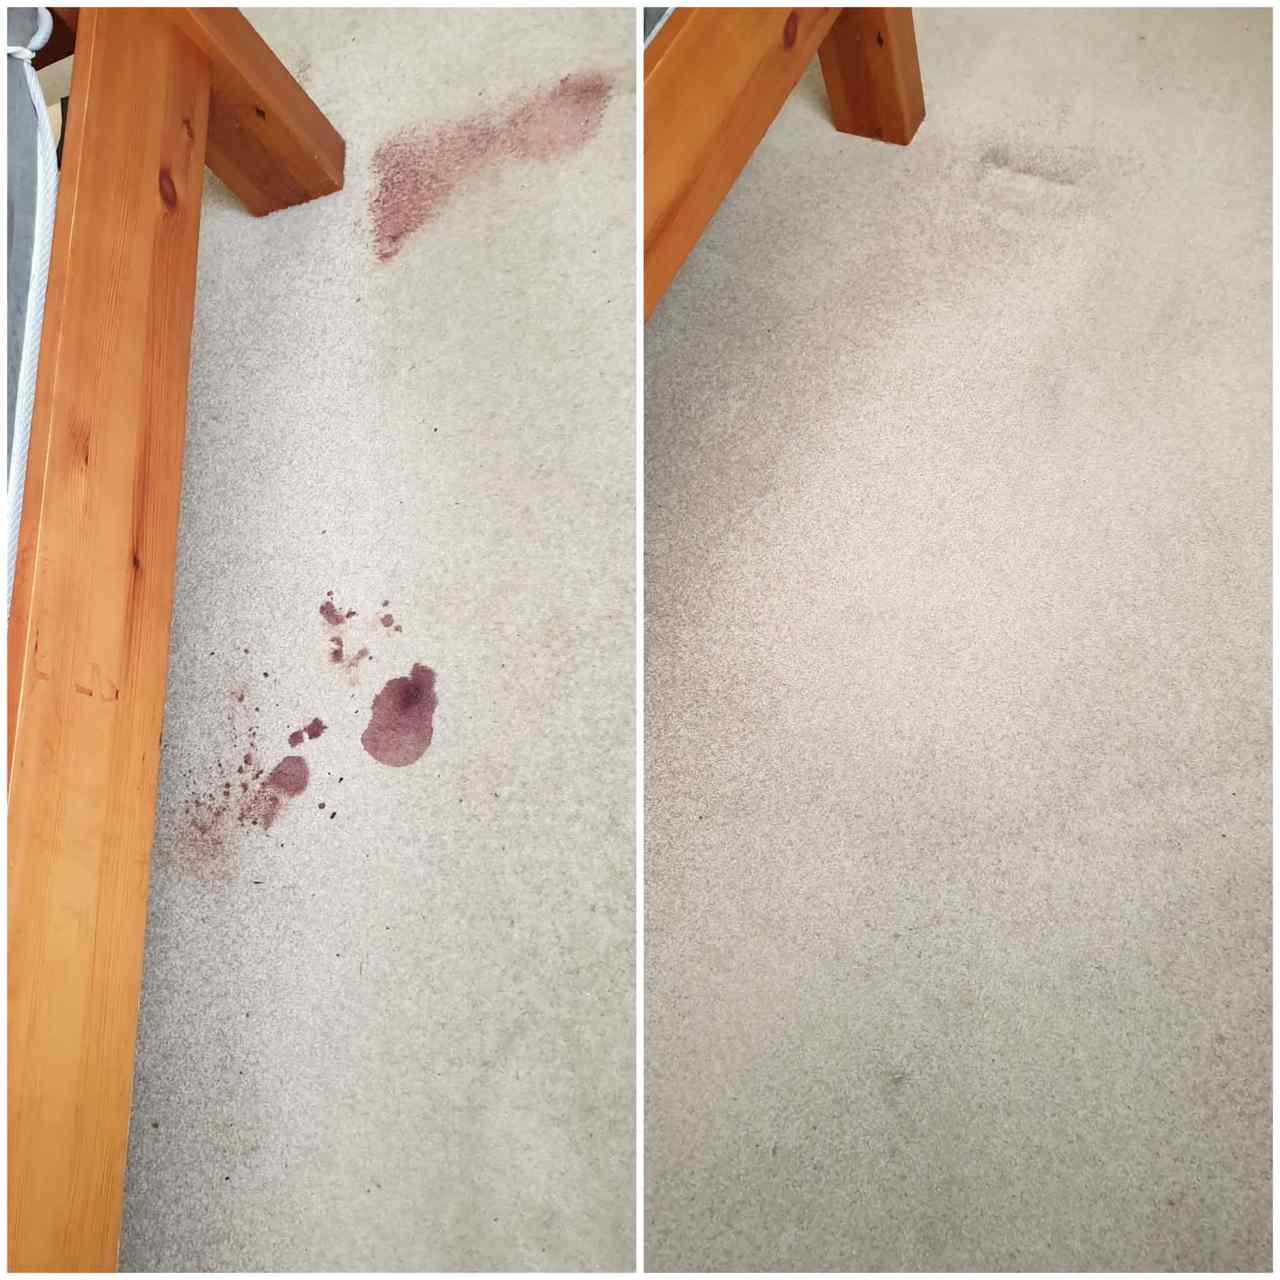 Removing wine from a carpet